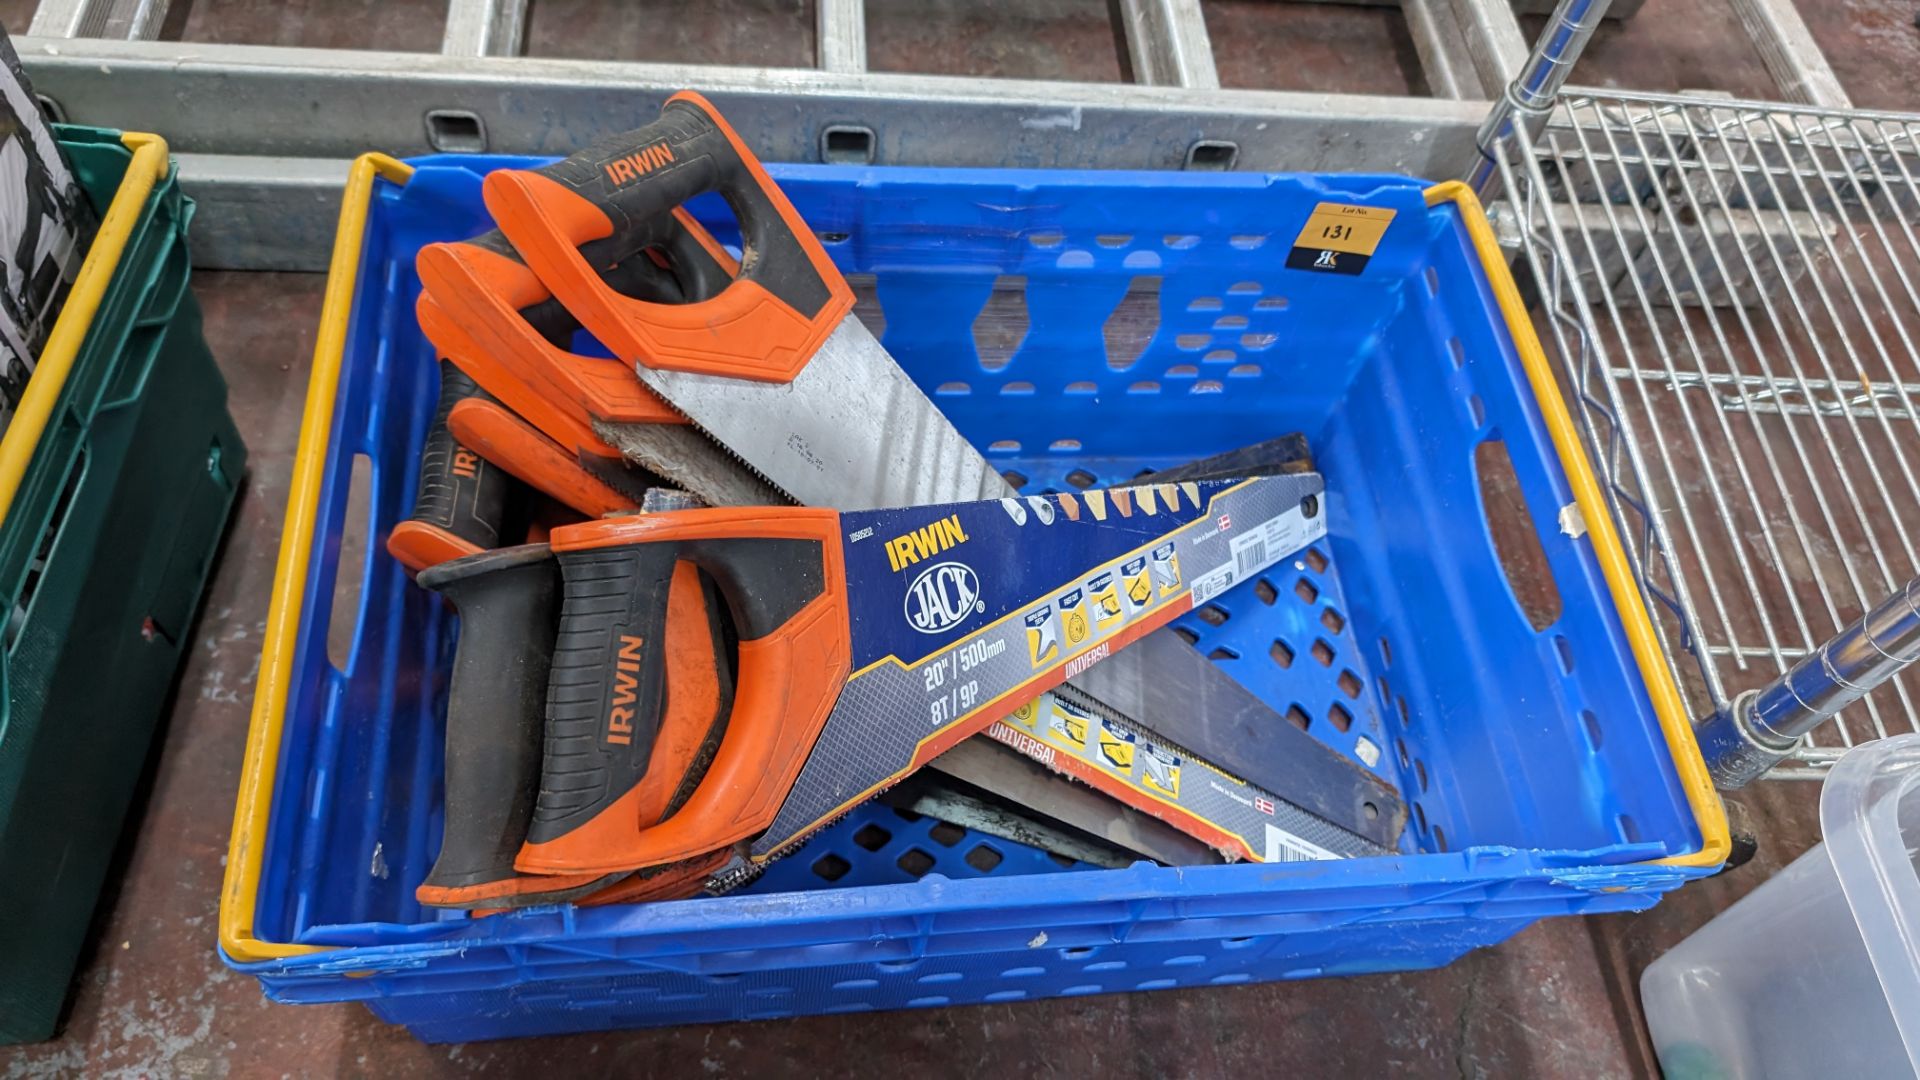 The contents of a crate of hand saws - Image 2 of 5